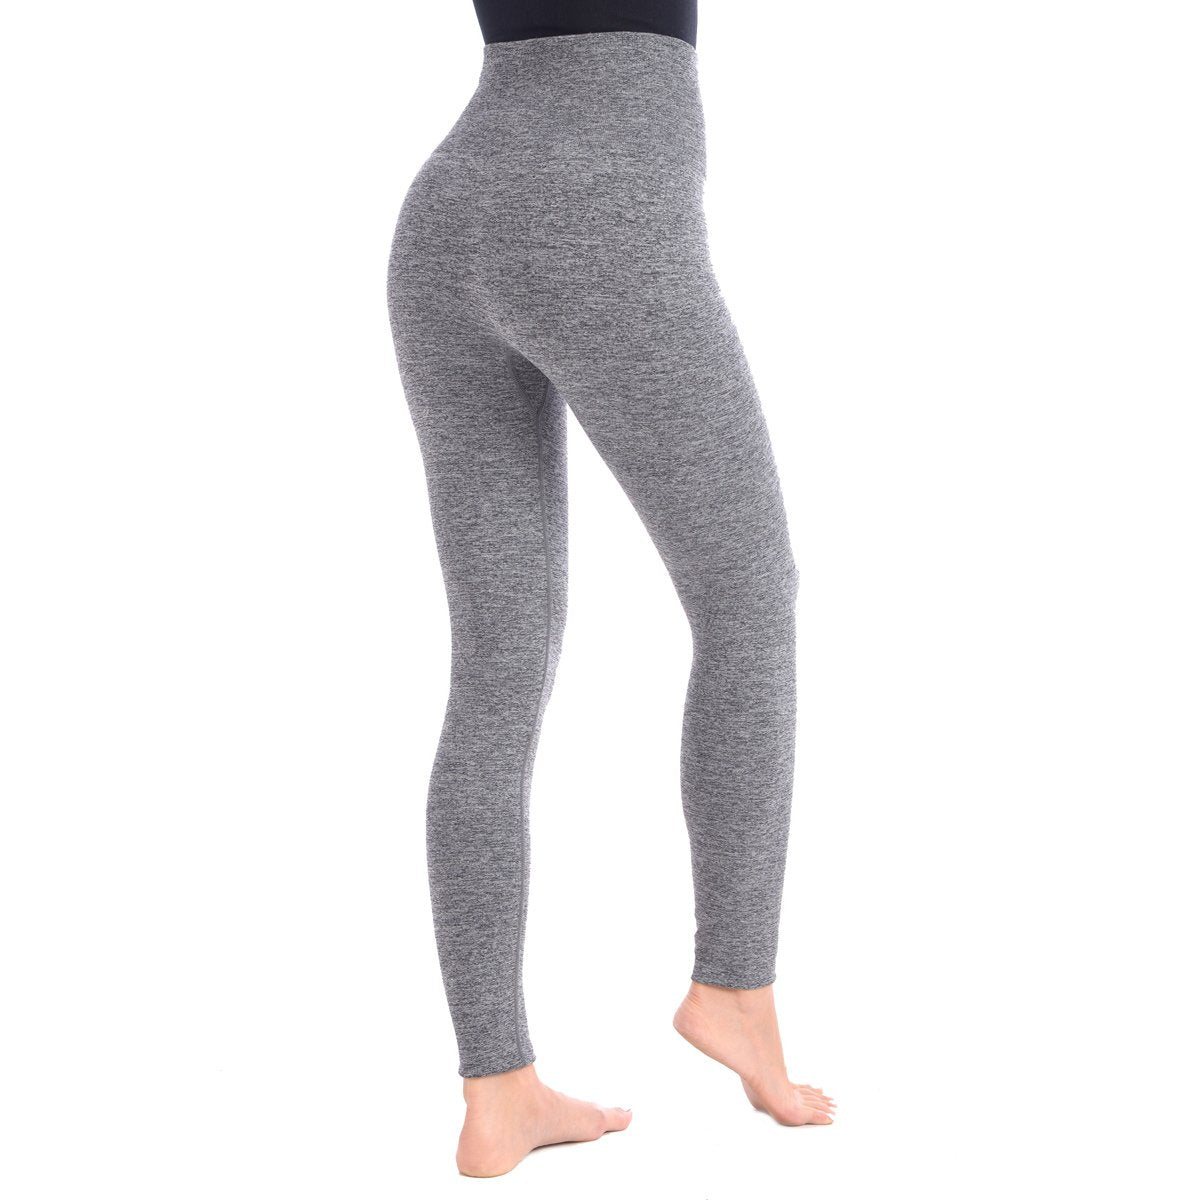 Look at Me Leggings With Double Lyaer 5" Hi-Waistband - Grey Mix